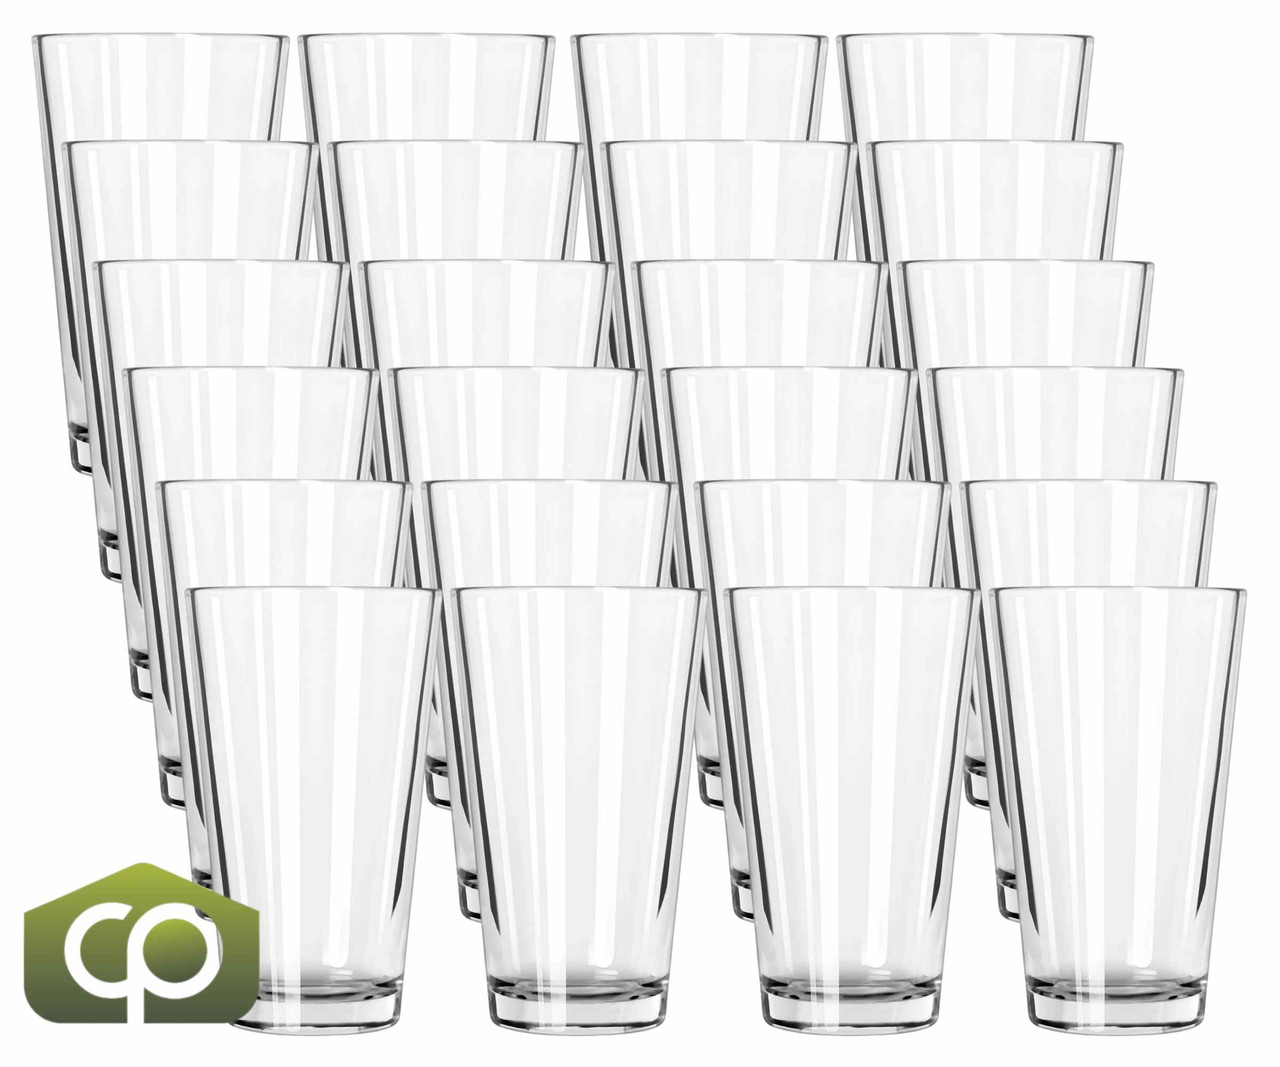 Libbey 5137 20 oz Restaurant Basics Mixing Glass - Clear Glass, (24/Case) - Chicken Pieces